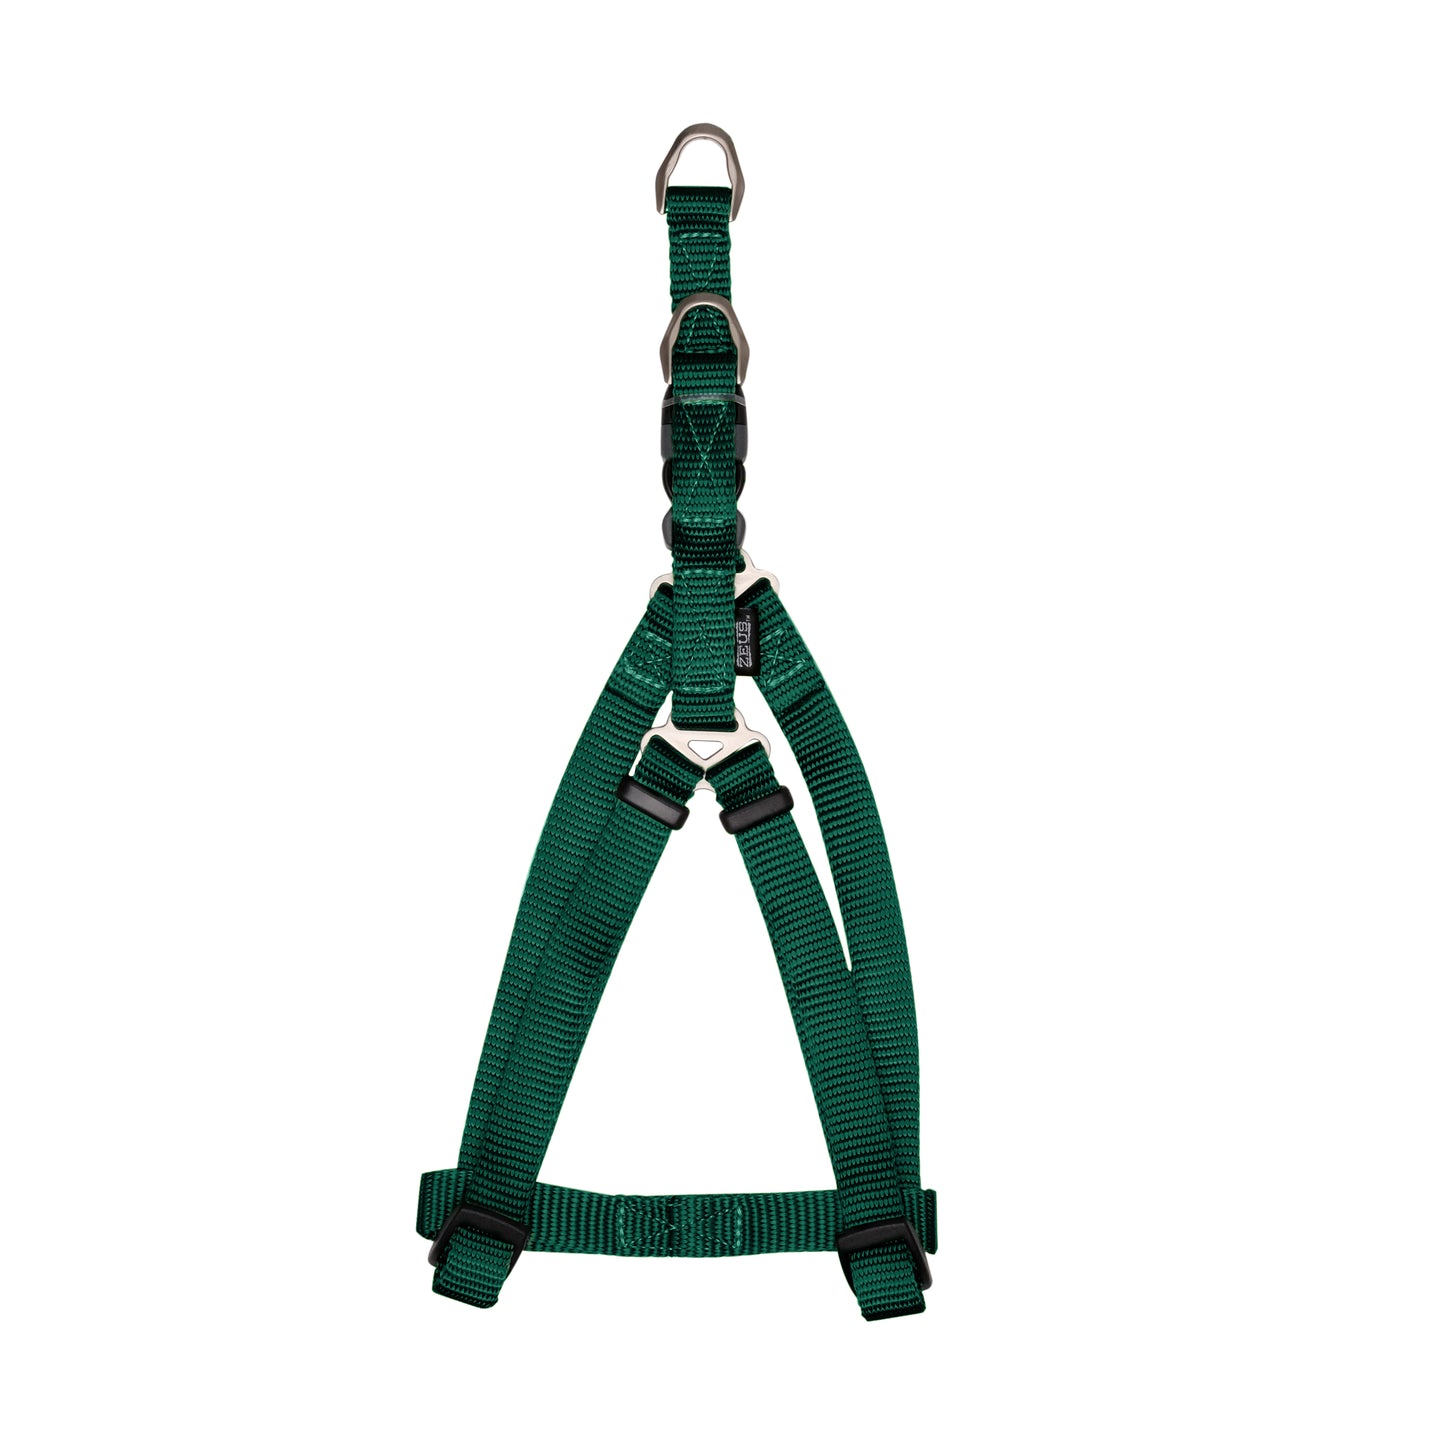 Zeus Nylon Dog Harness Forest Green Med:1/2 x 17-22 in Harnesses Med:1/2 x 17-22 in | PetMax Canada